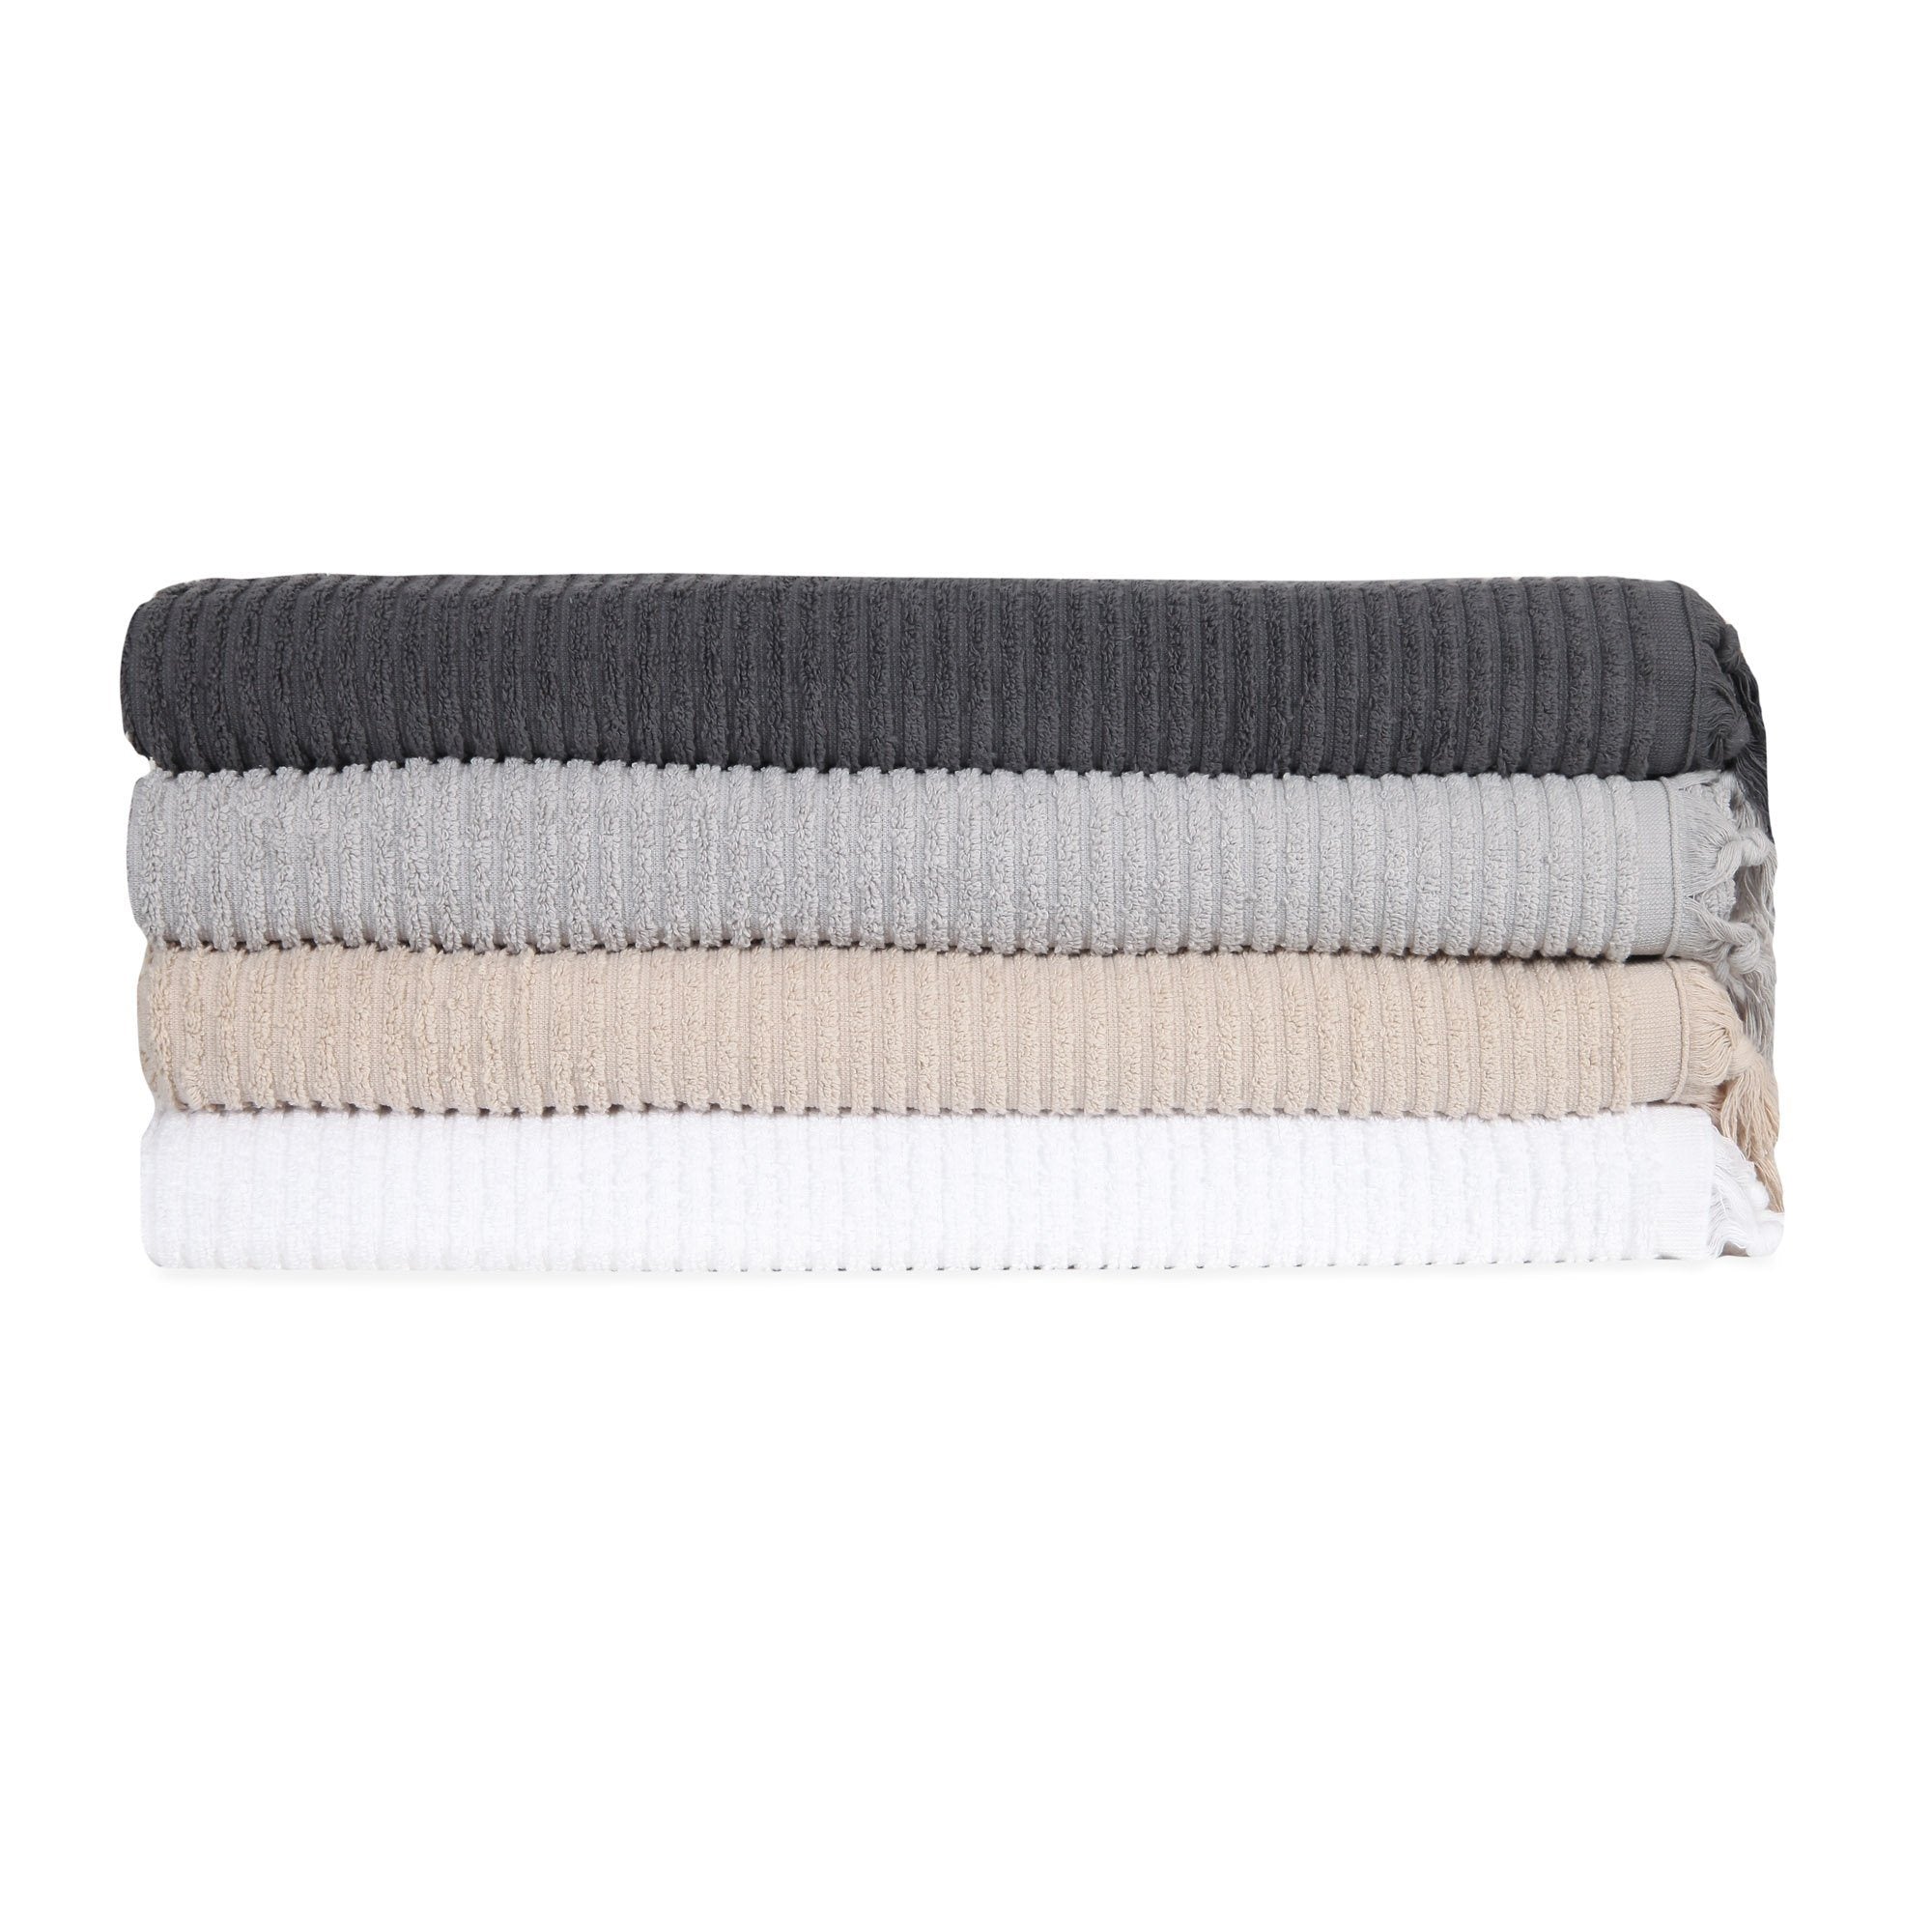 Towel Terry Ribbed Cuff Jogger – the risolve